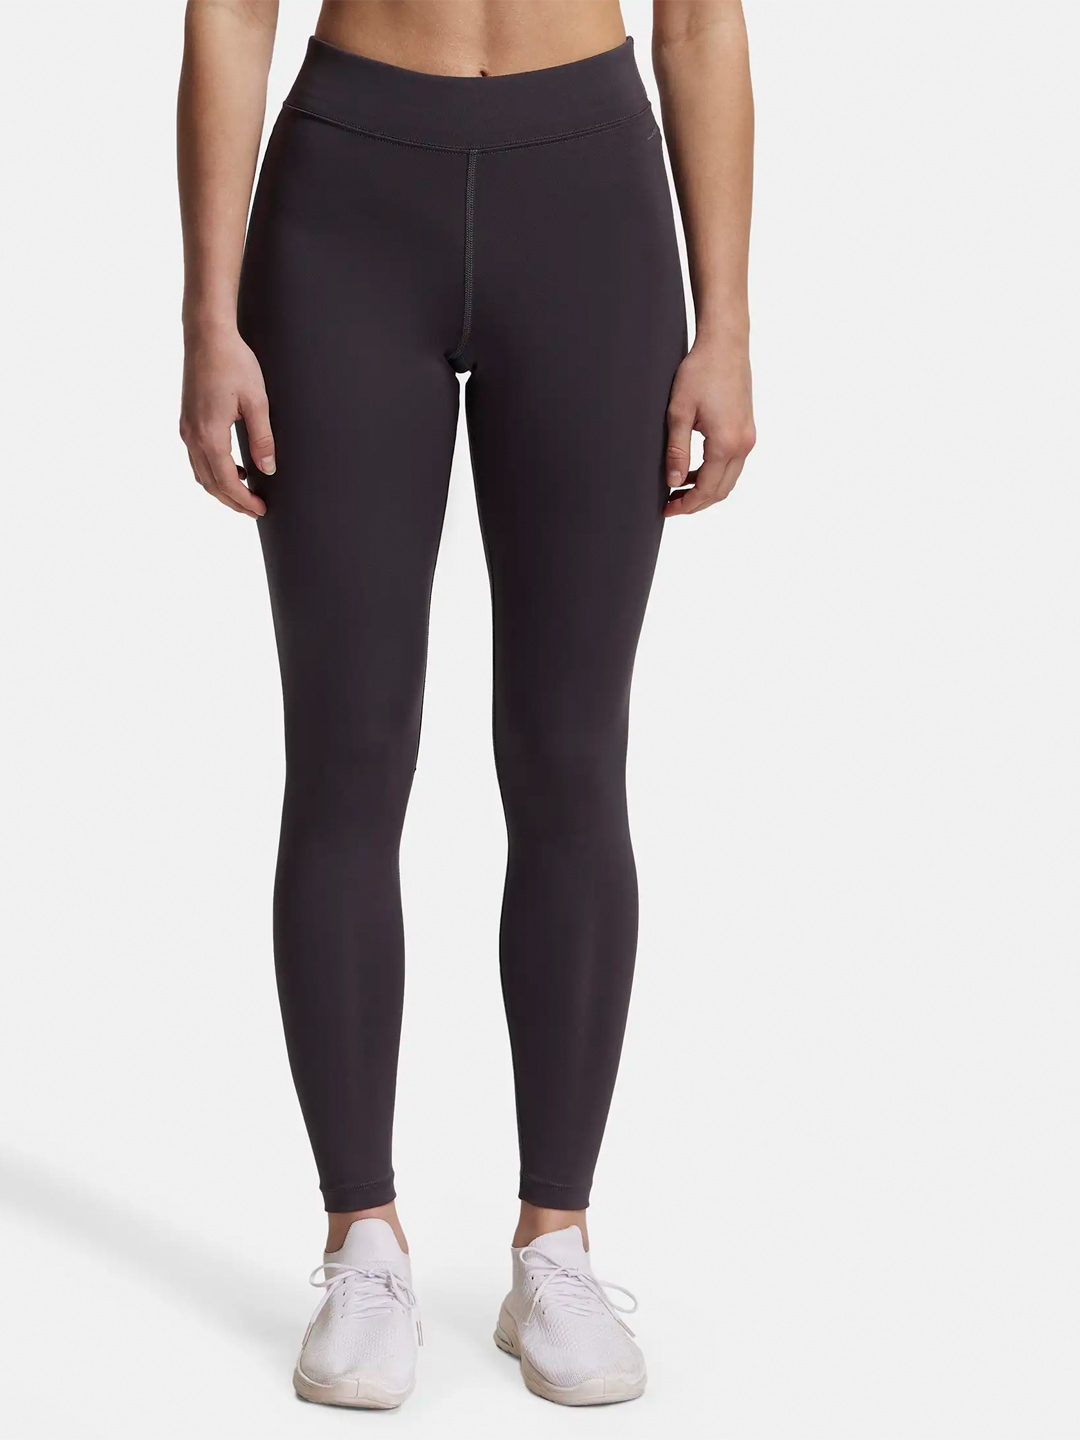 

Jockey Performance Leggings with Broad Waistband and Stay Dry Technology, Grey